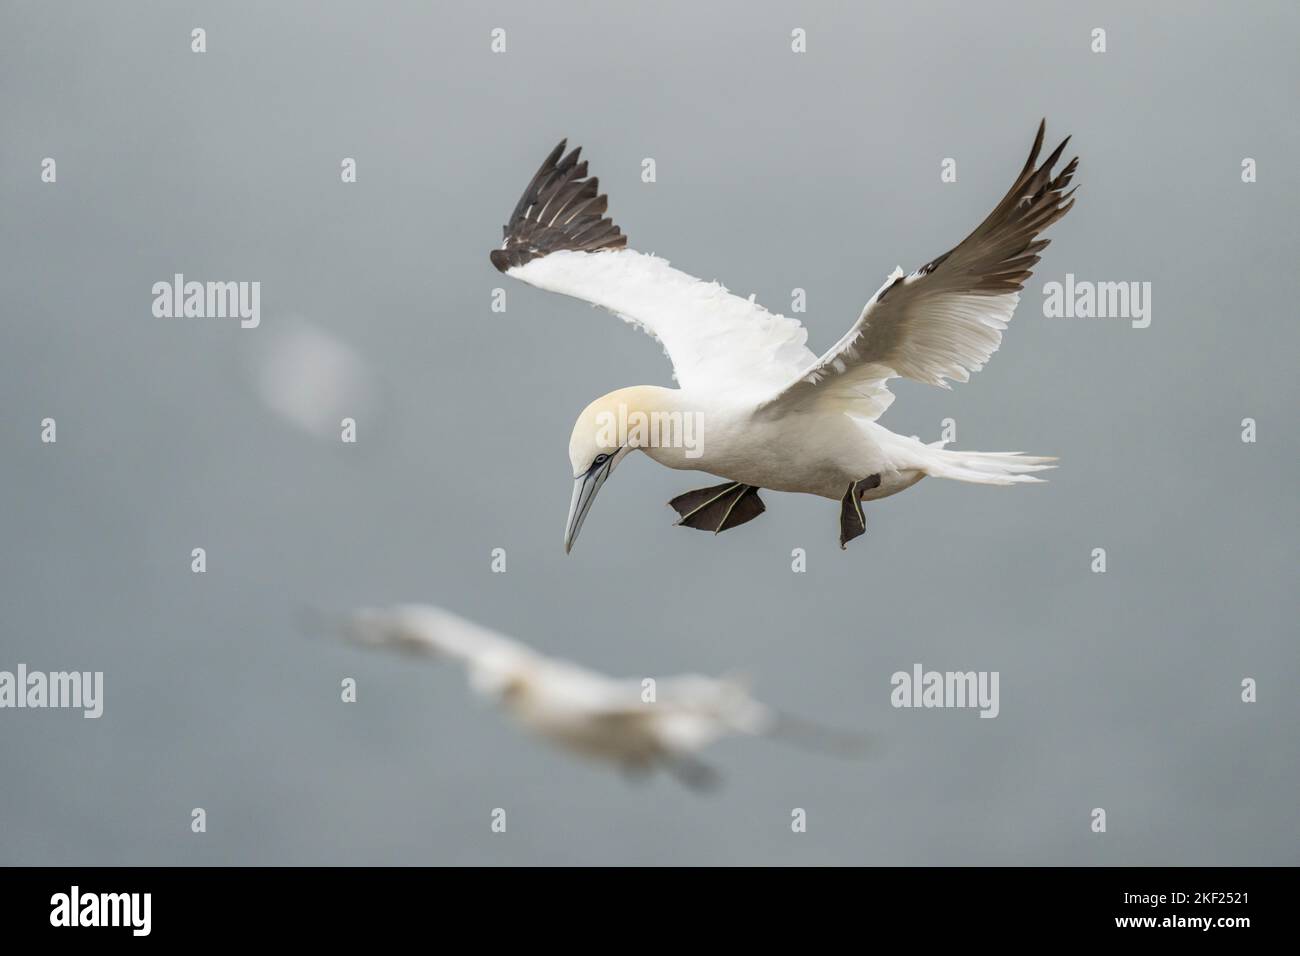 Northern Gannet Morus bassanus, an adult bird hangs in the air using wind updrafts from a cliff,Yorkshire, UK, September Stock Photo